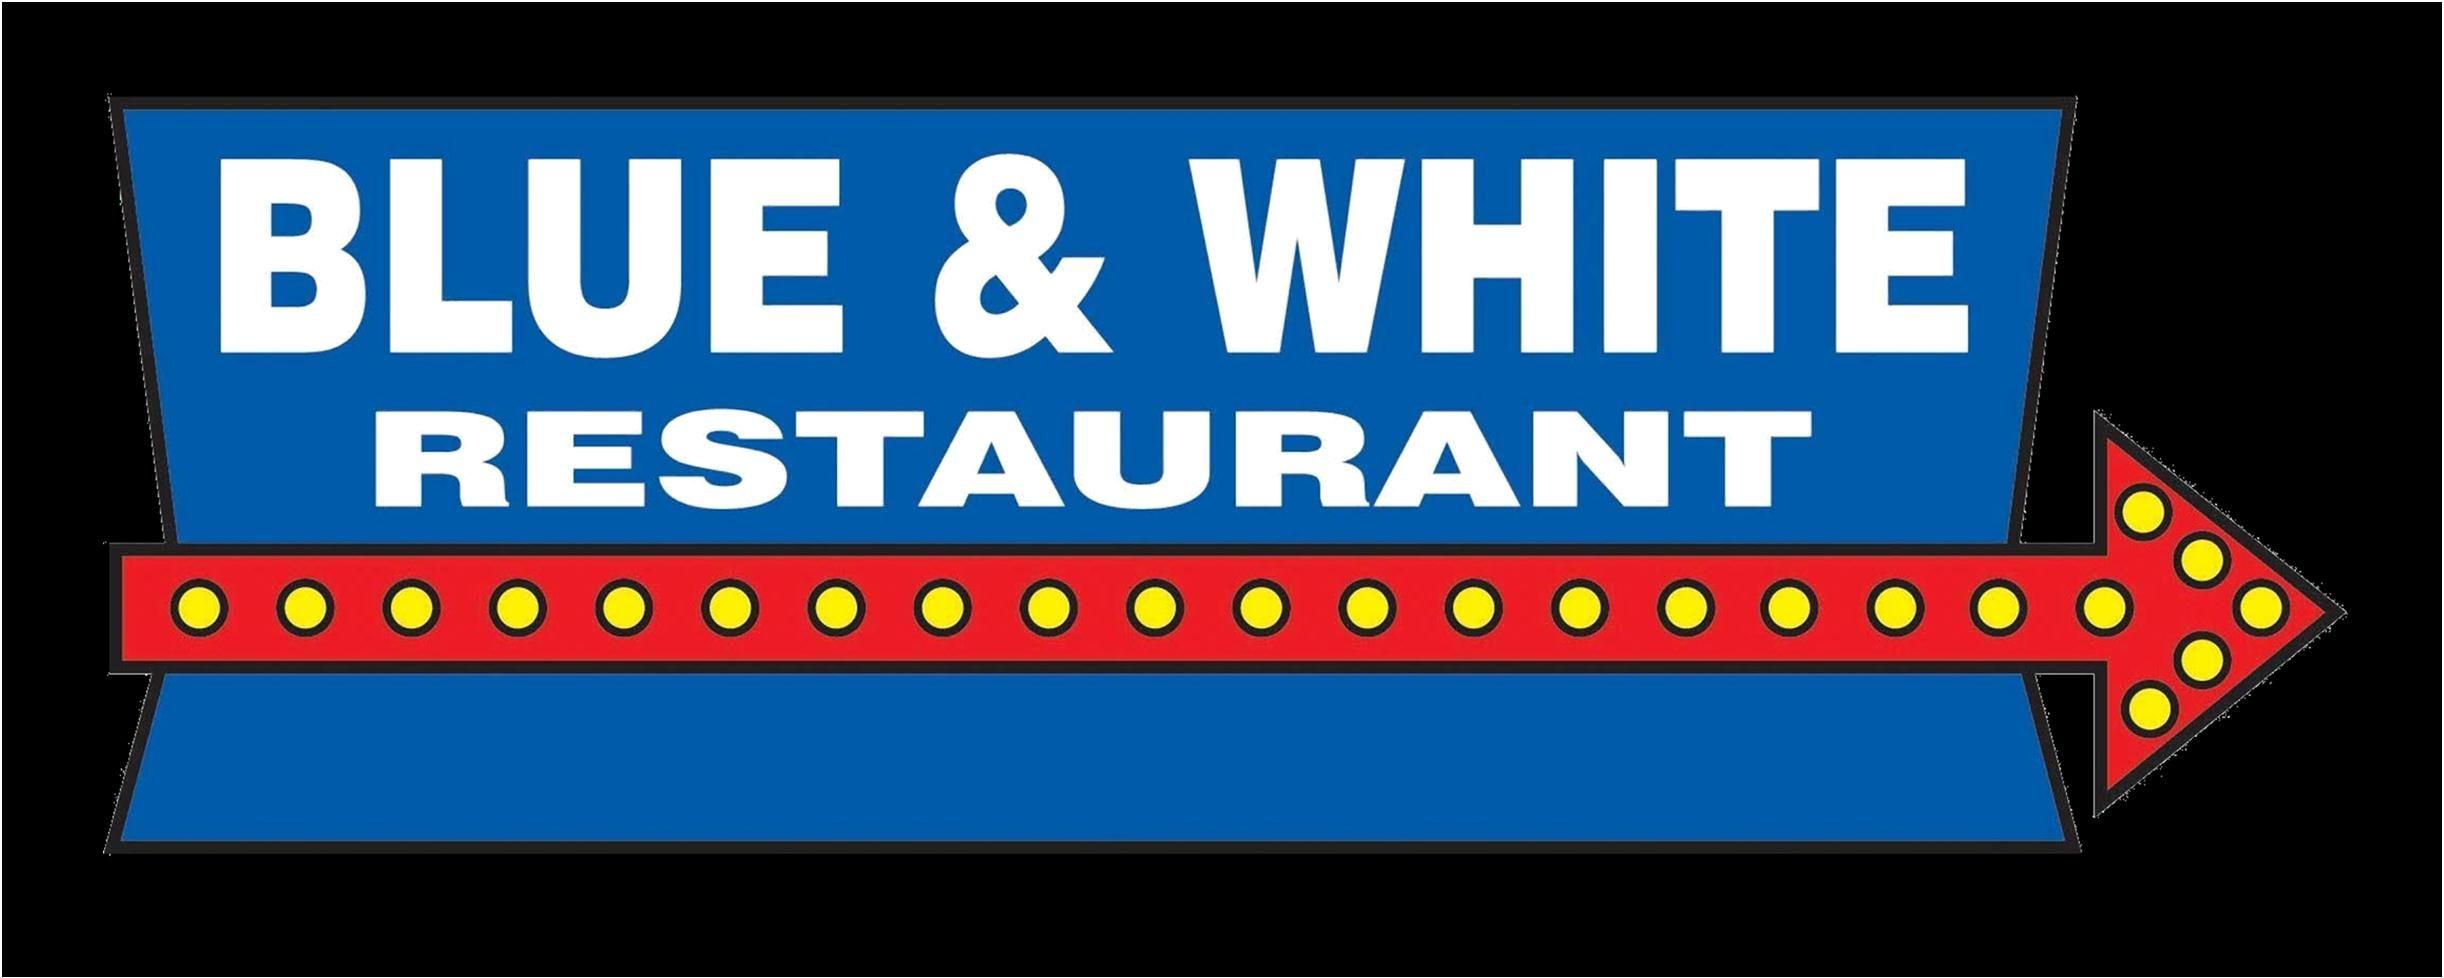 White with Blue Rectangles Logo - Blue and White Restaurant ... Established Since 1924